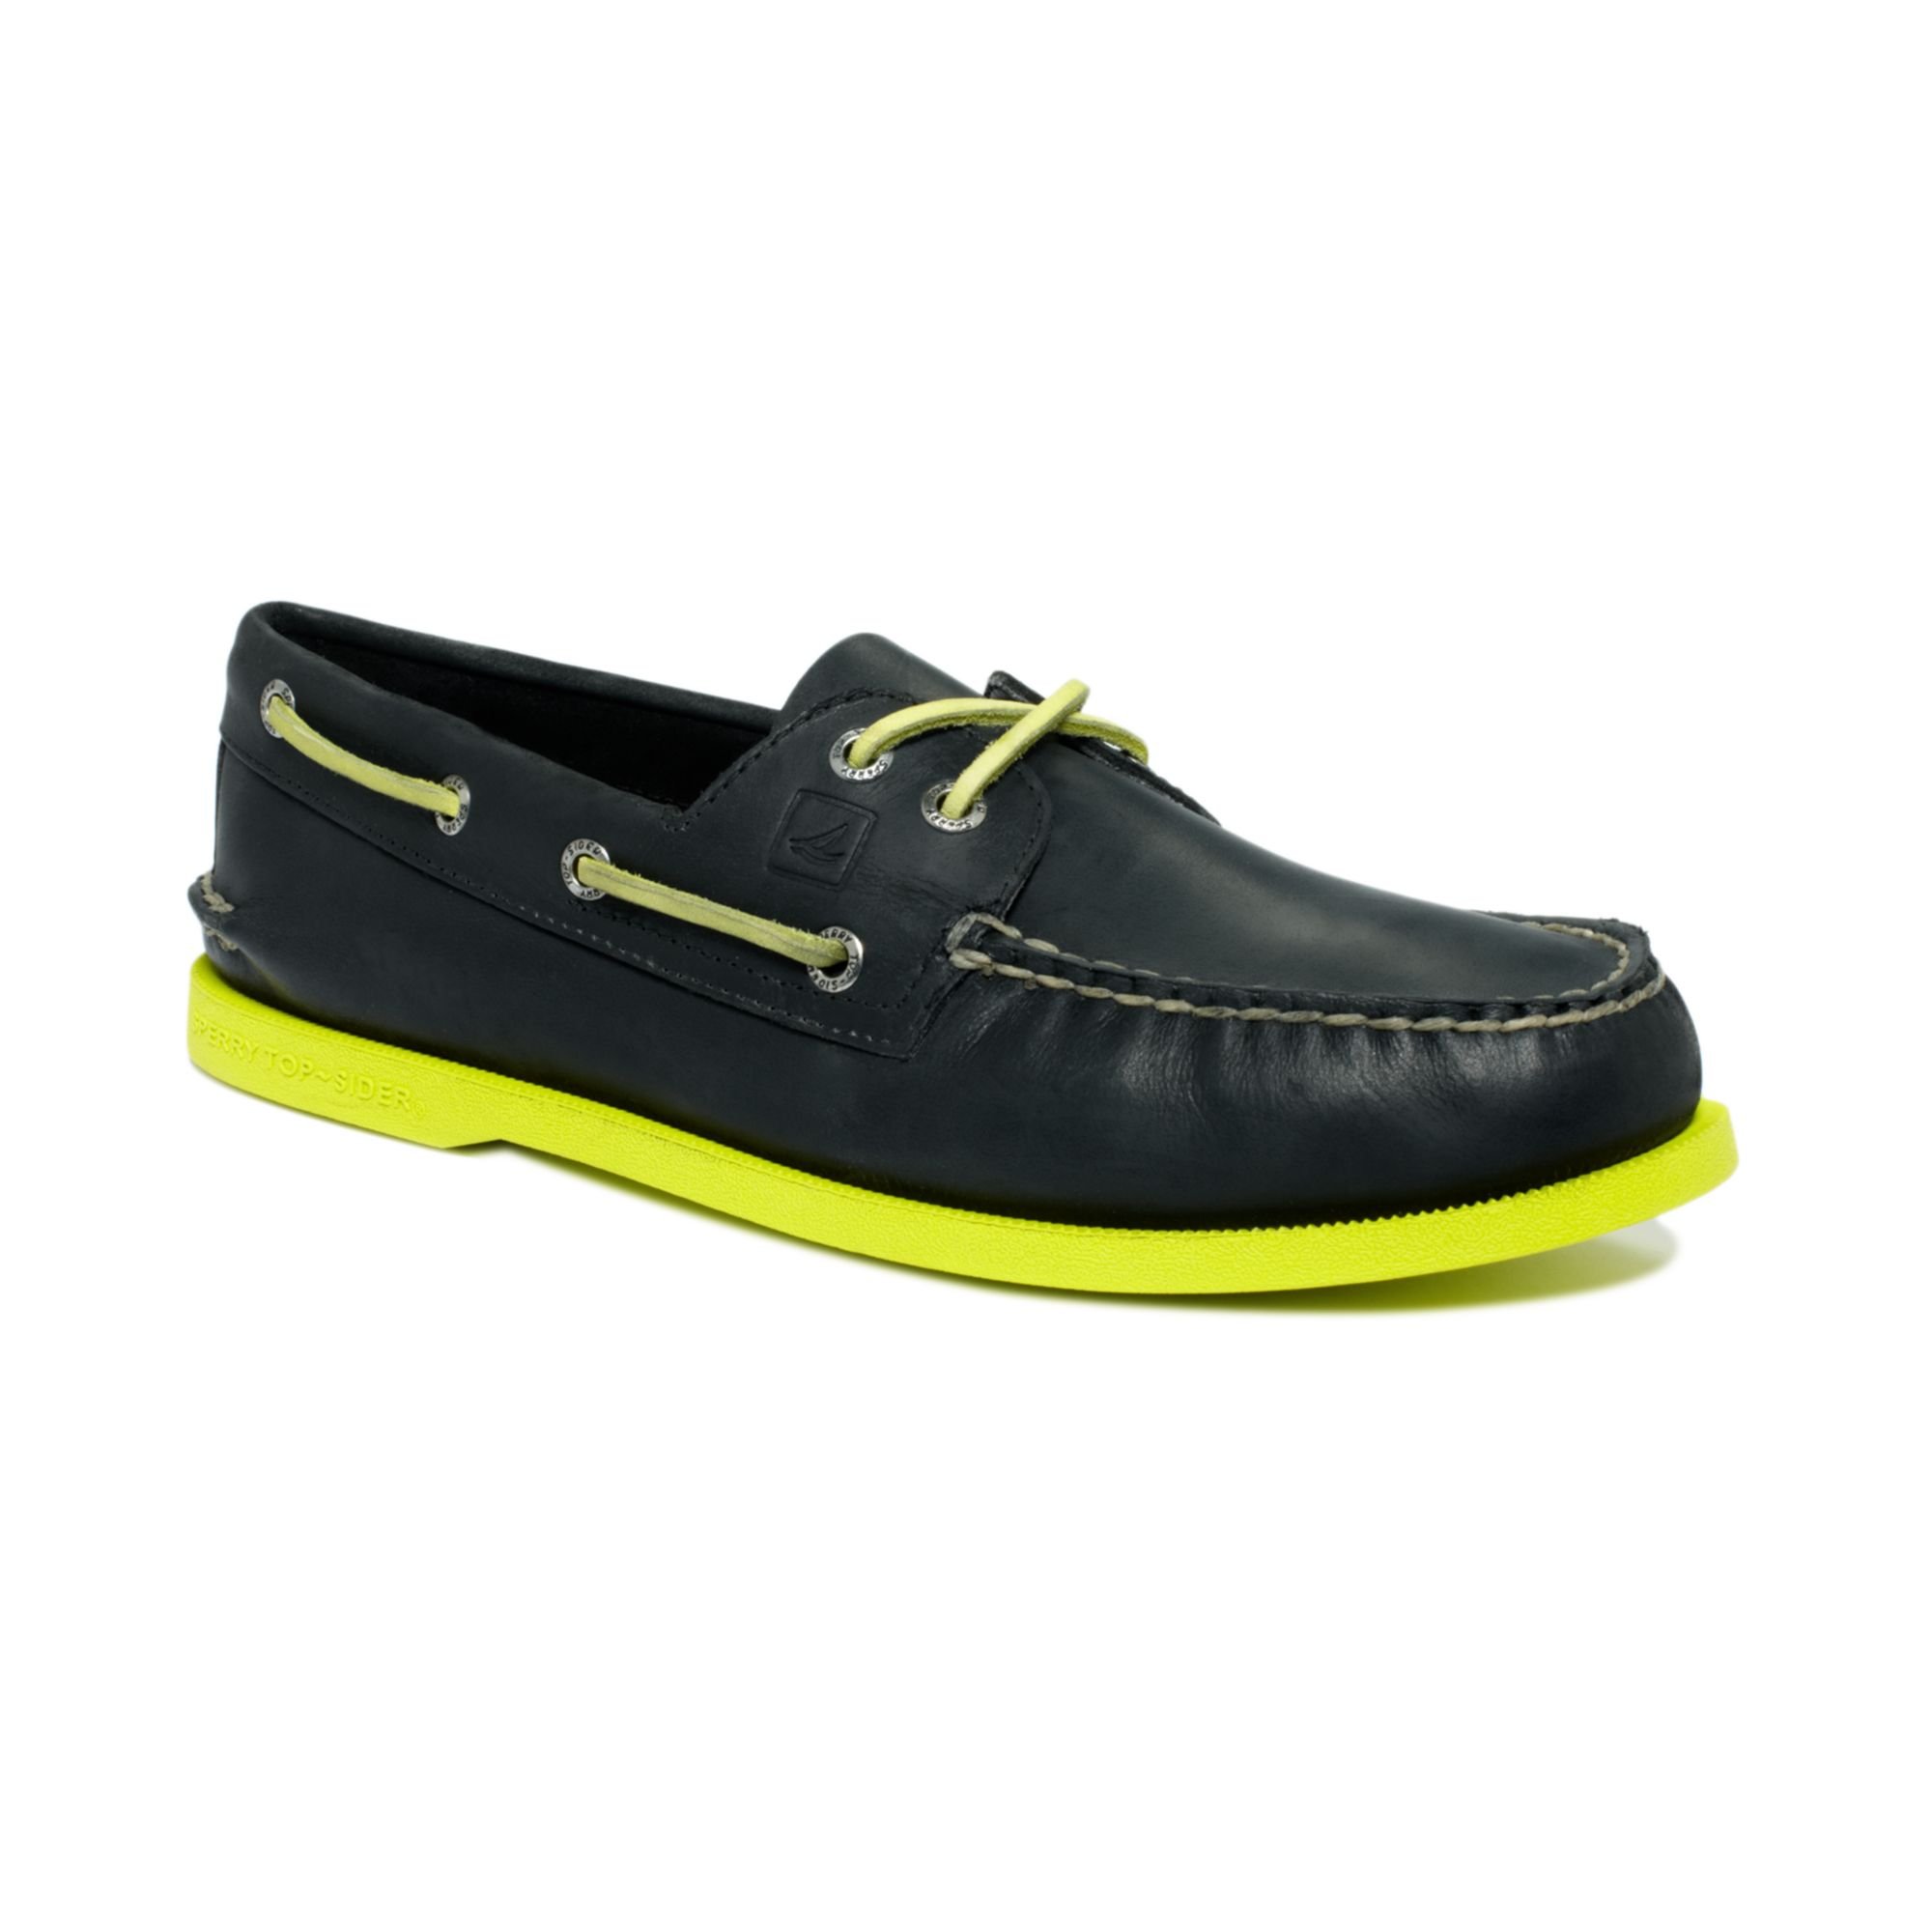 yellow sperry boat shoes